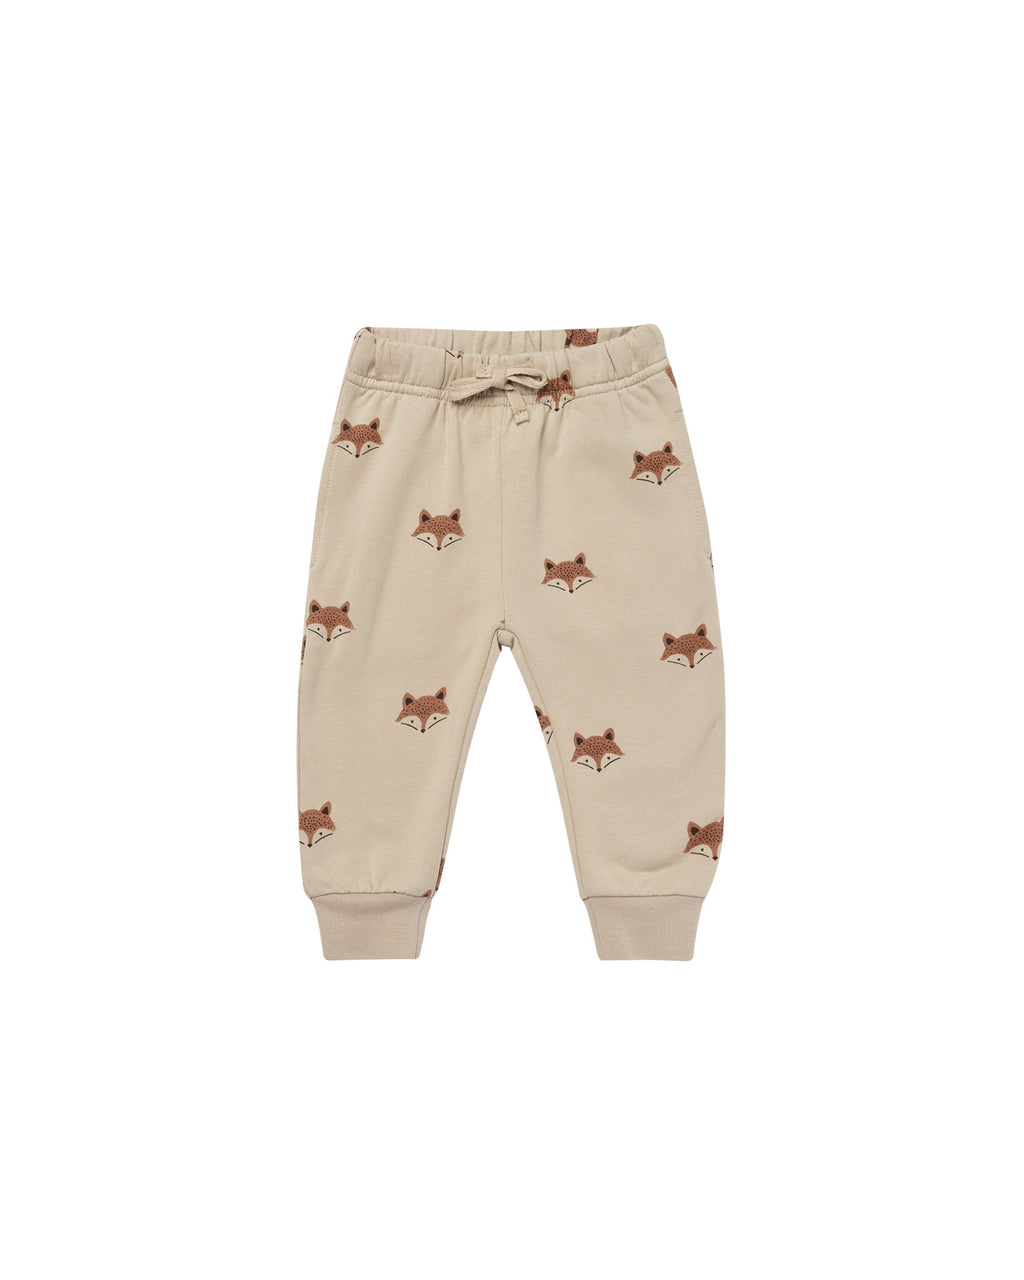 Quincy Mae Relaxed Fleece Sweatpant - Foxes